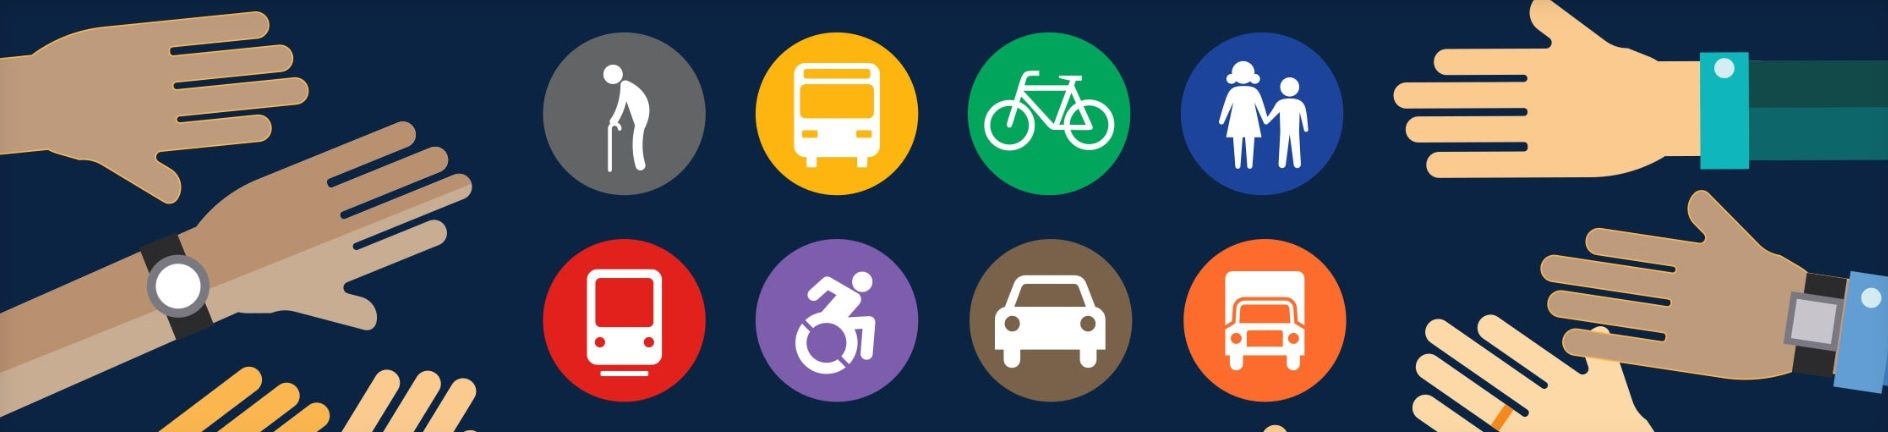 A graphic highlighting equity, including several hands pointed to the middle, and icons showing different modes of travel by people of all ages and abilities.